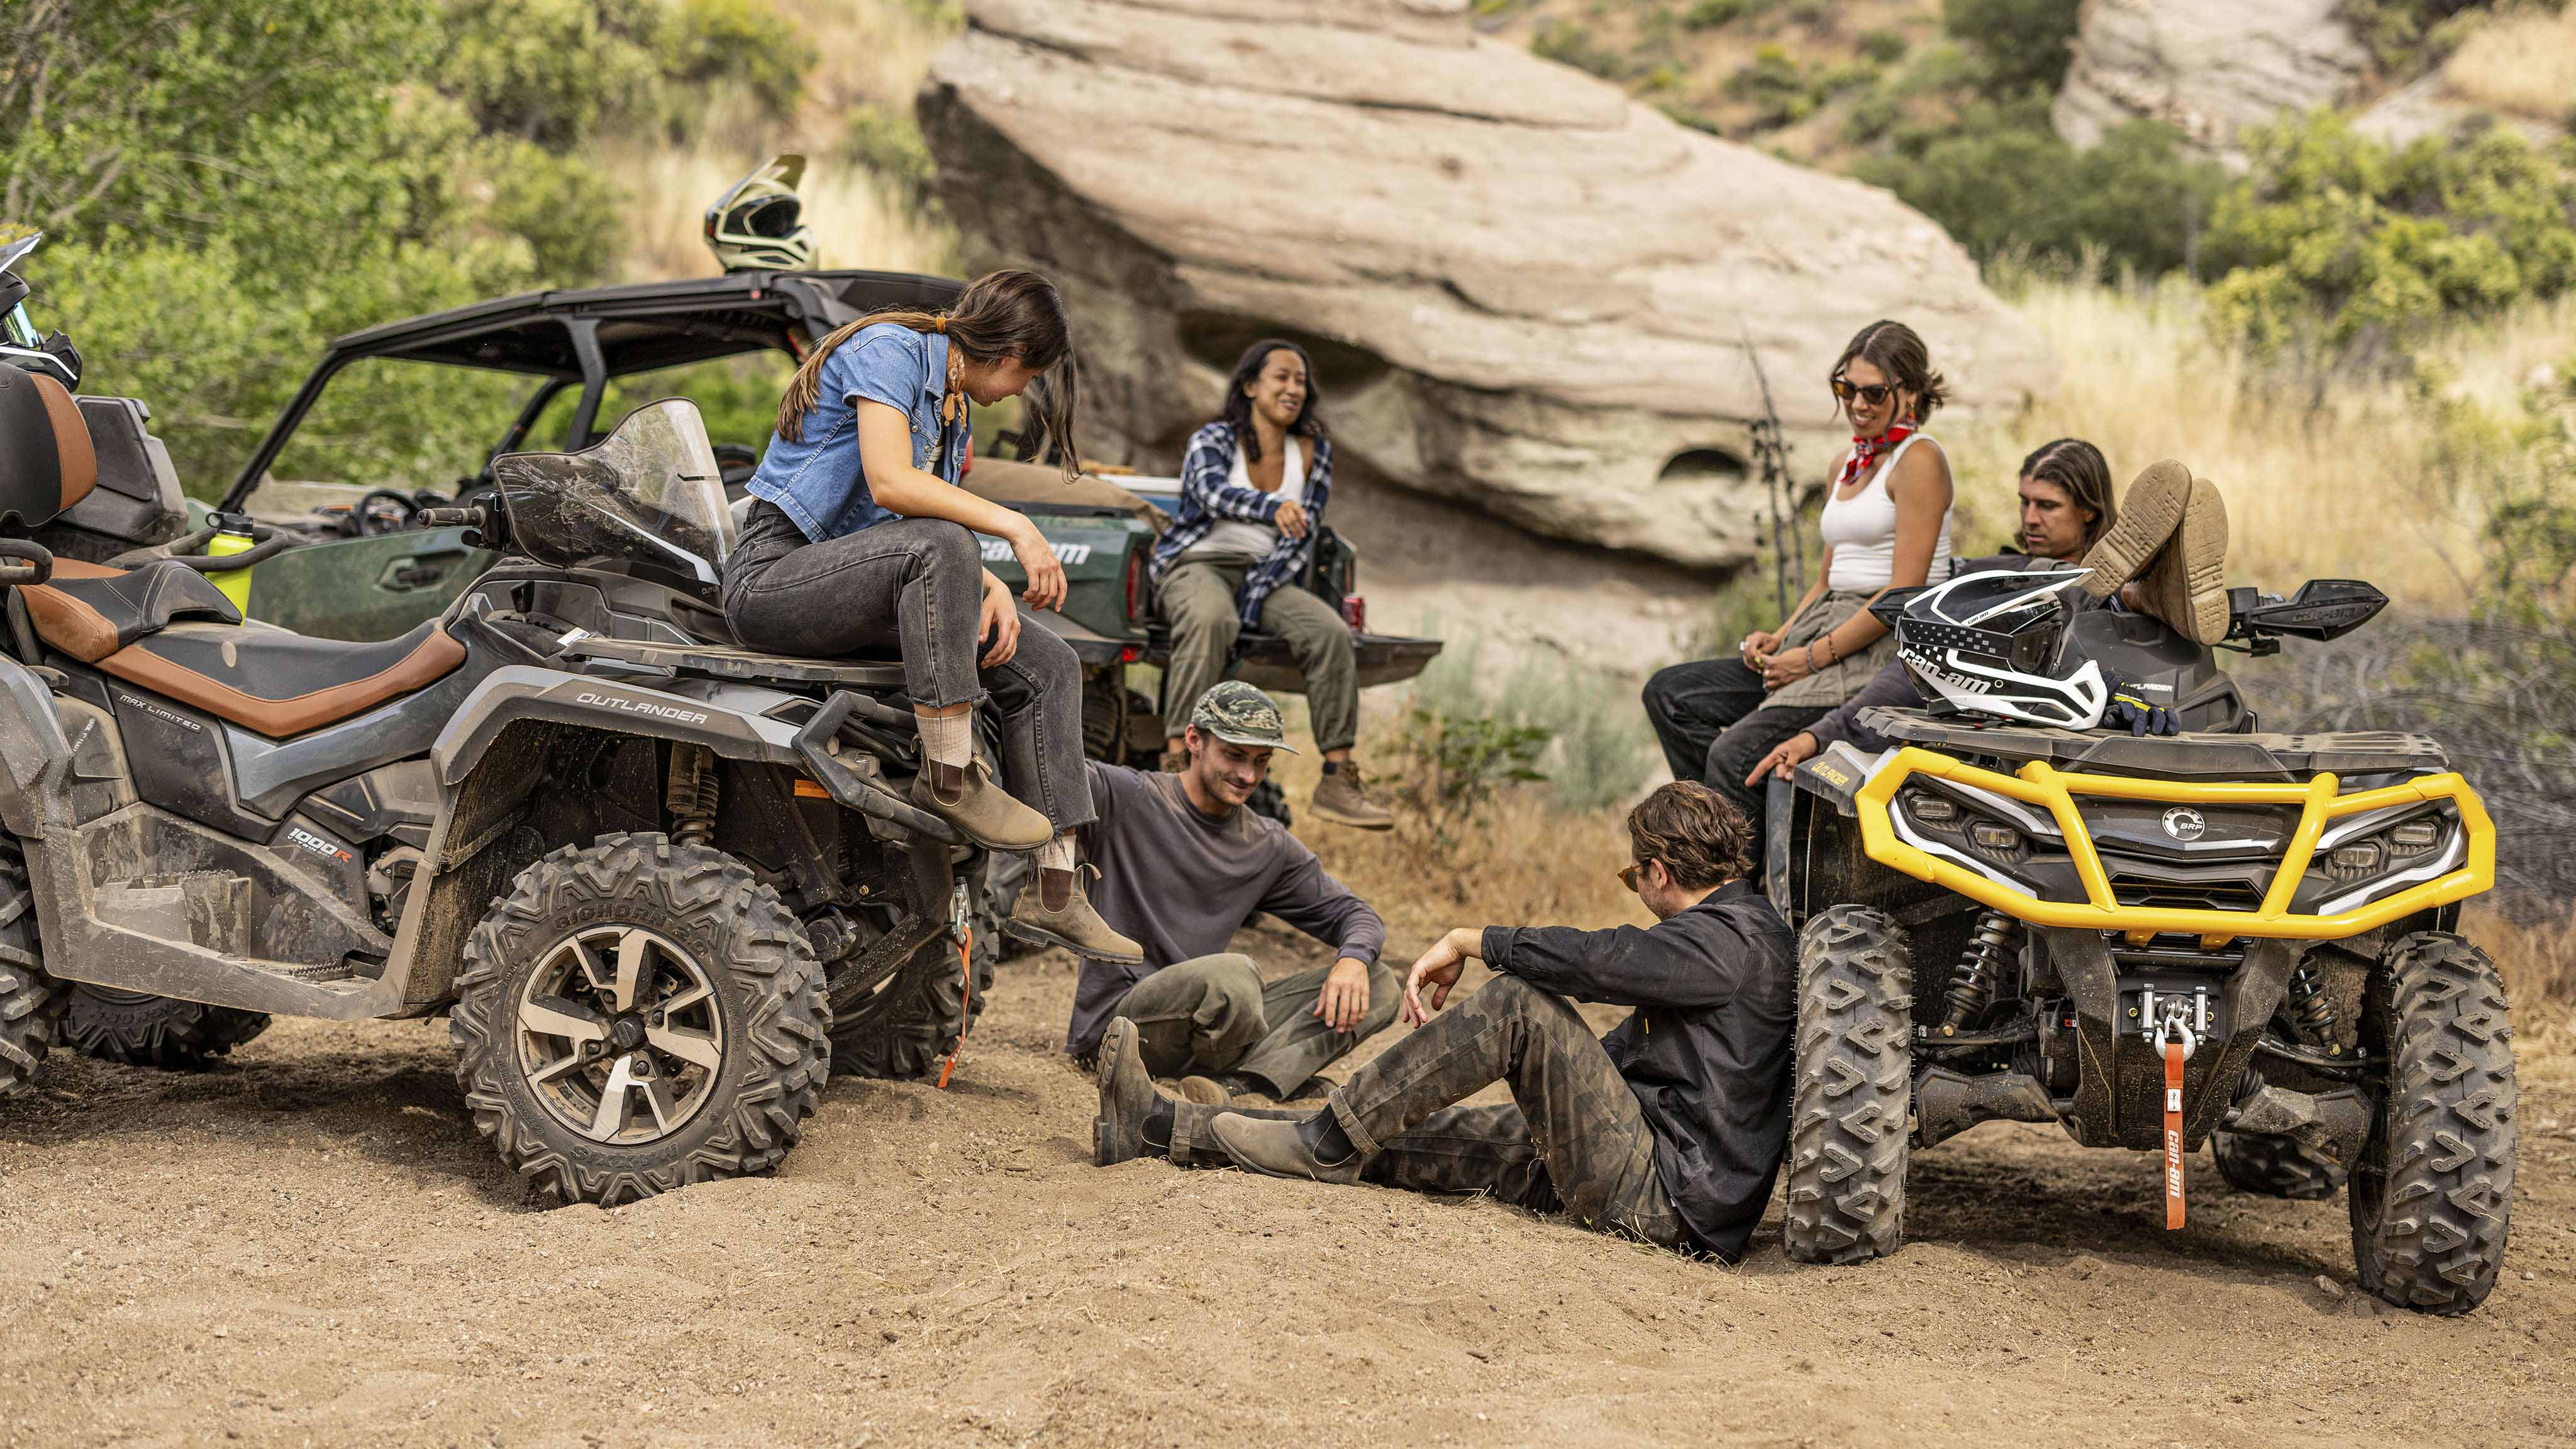 Group gathered around Can-Am off-road vehicles